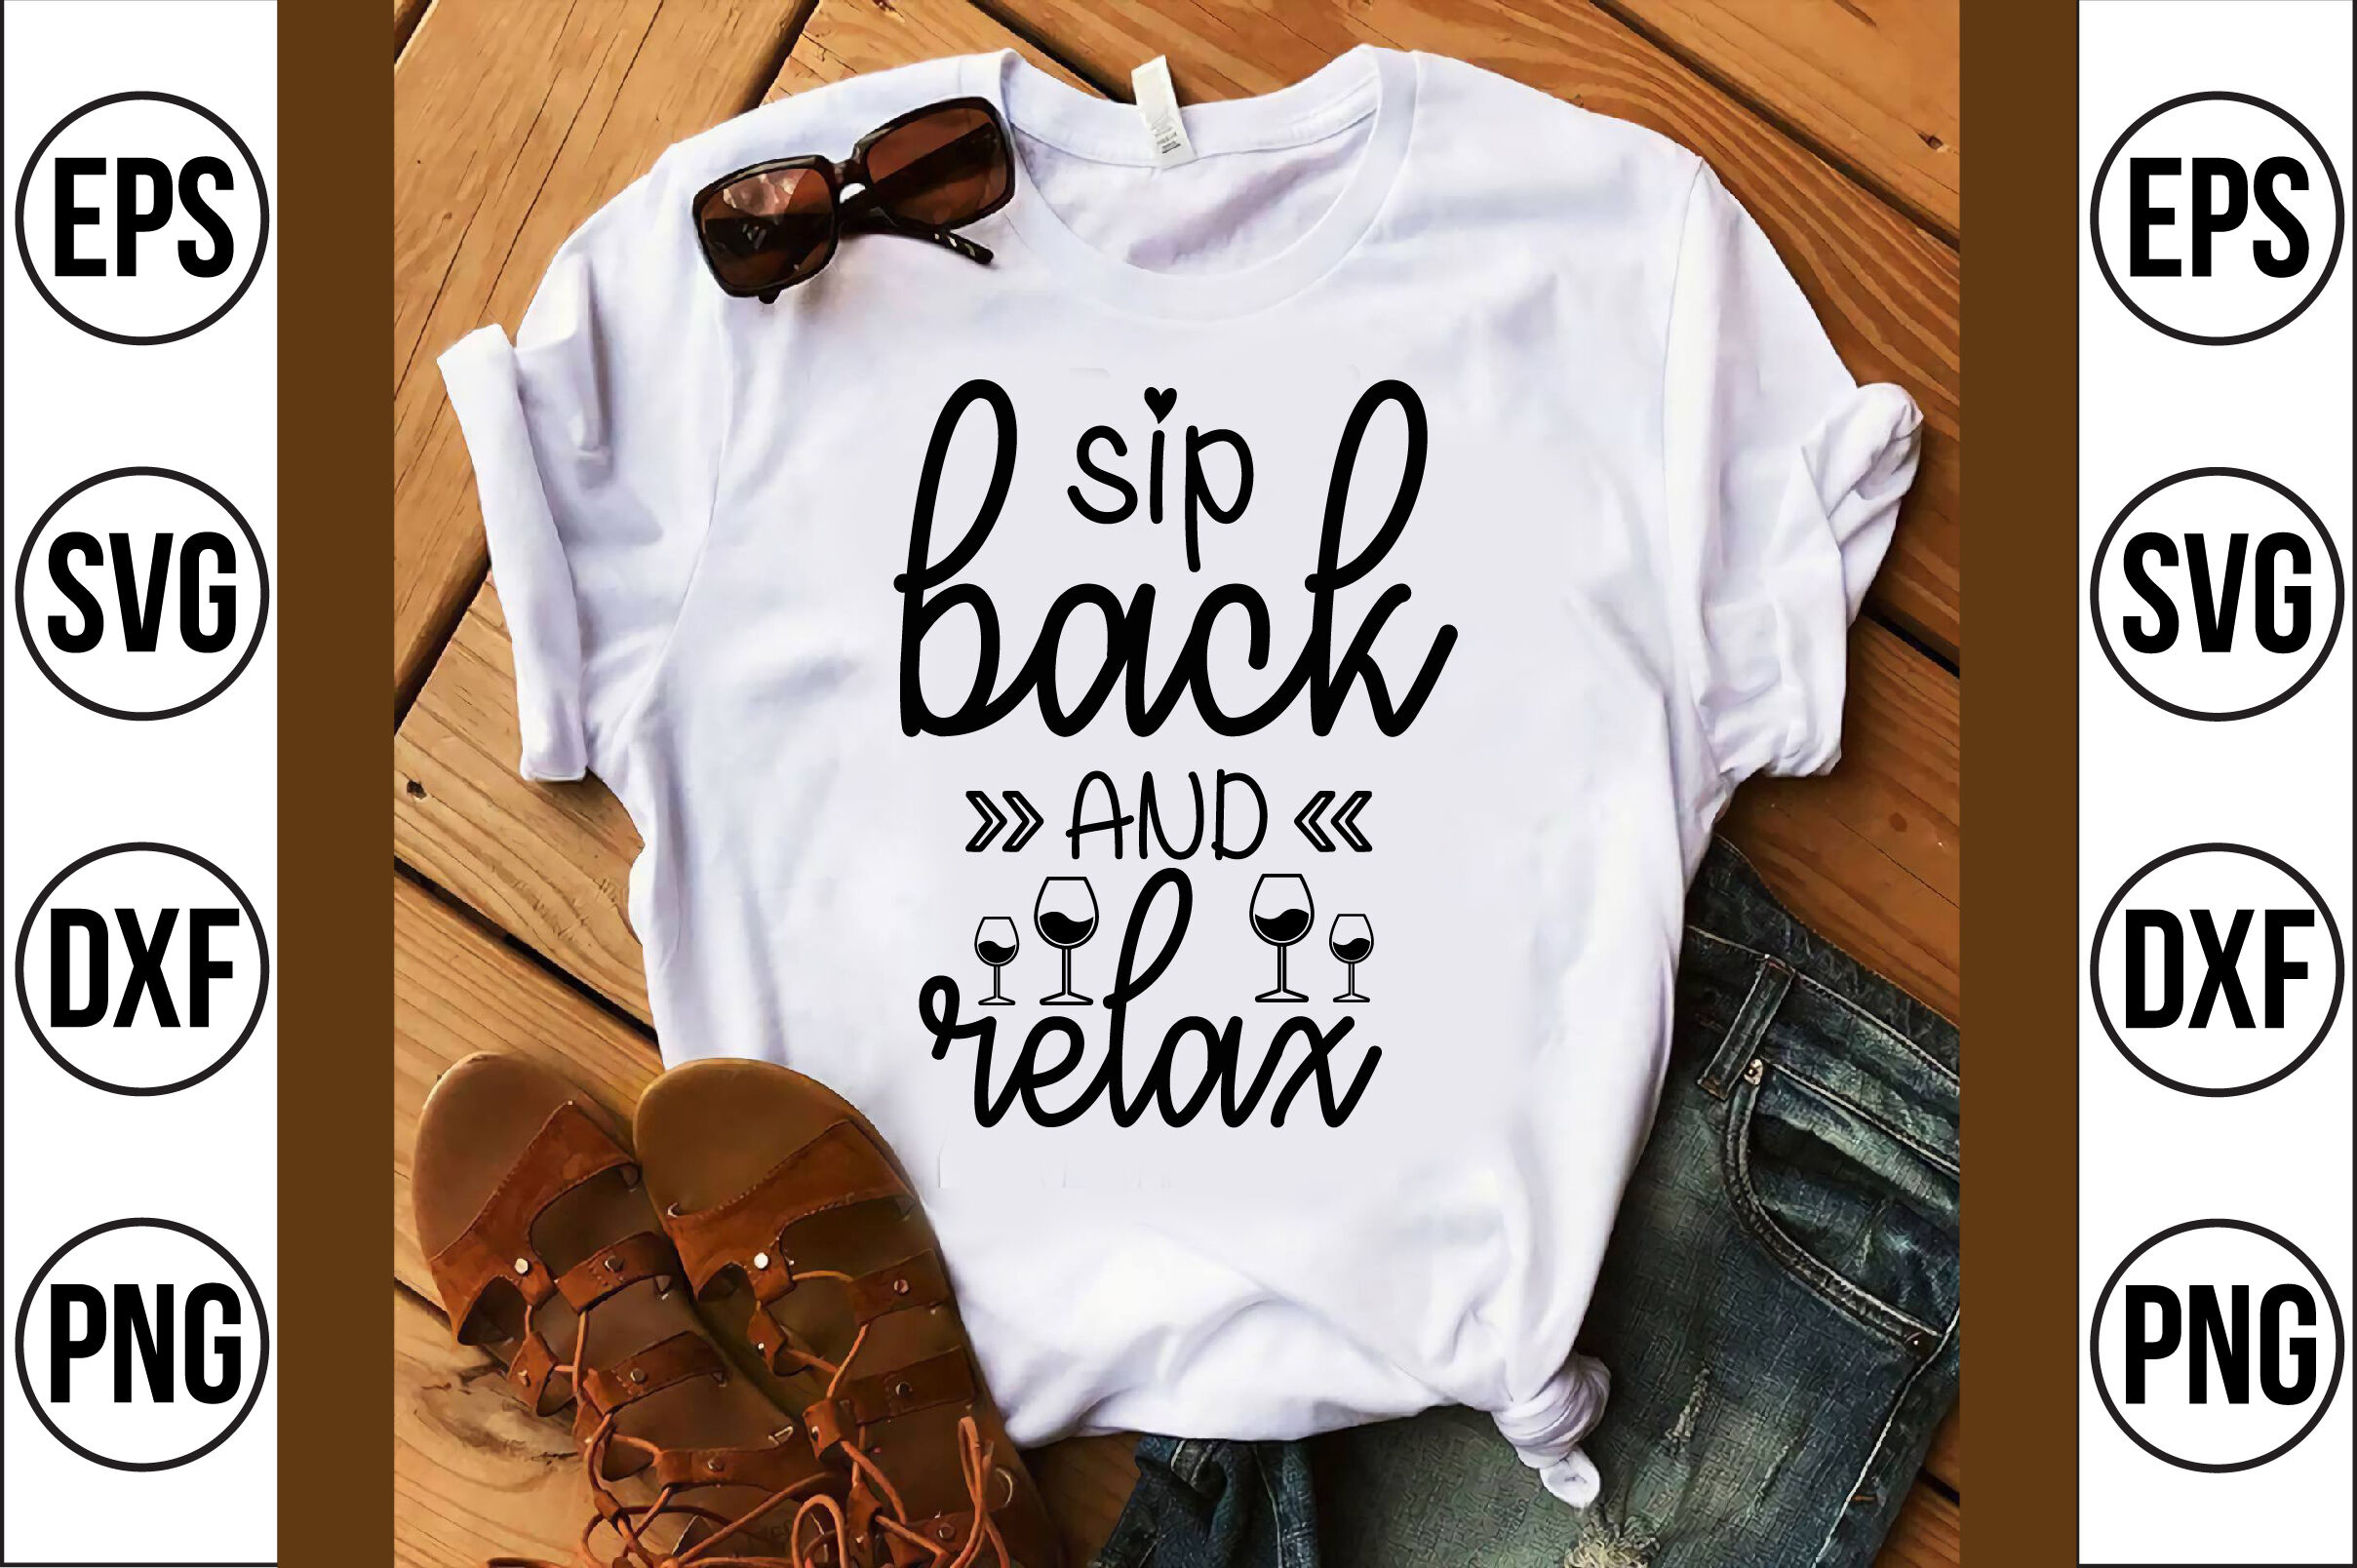 sip-back-and-relax-svg-cut-file-by-teebusiness-thehungryjpeg